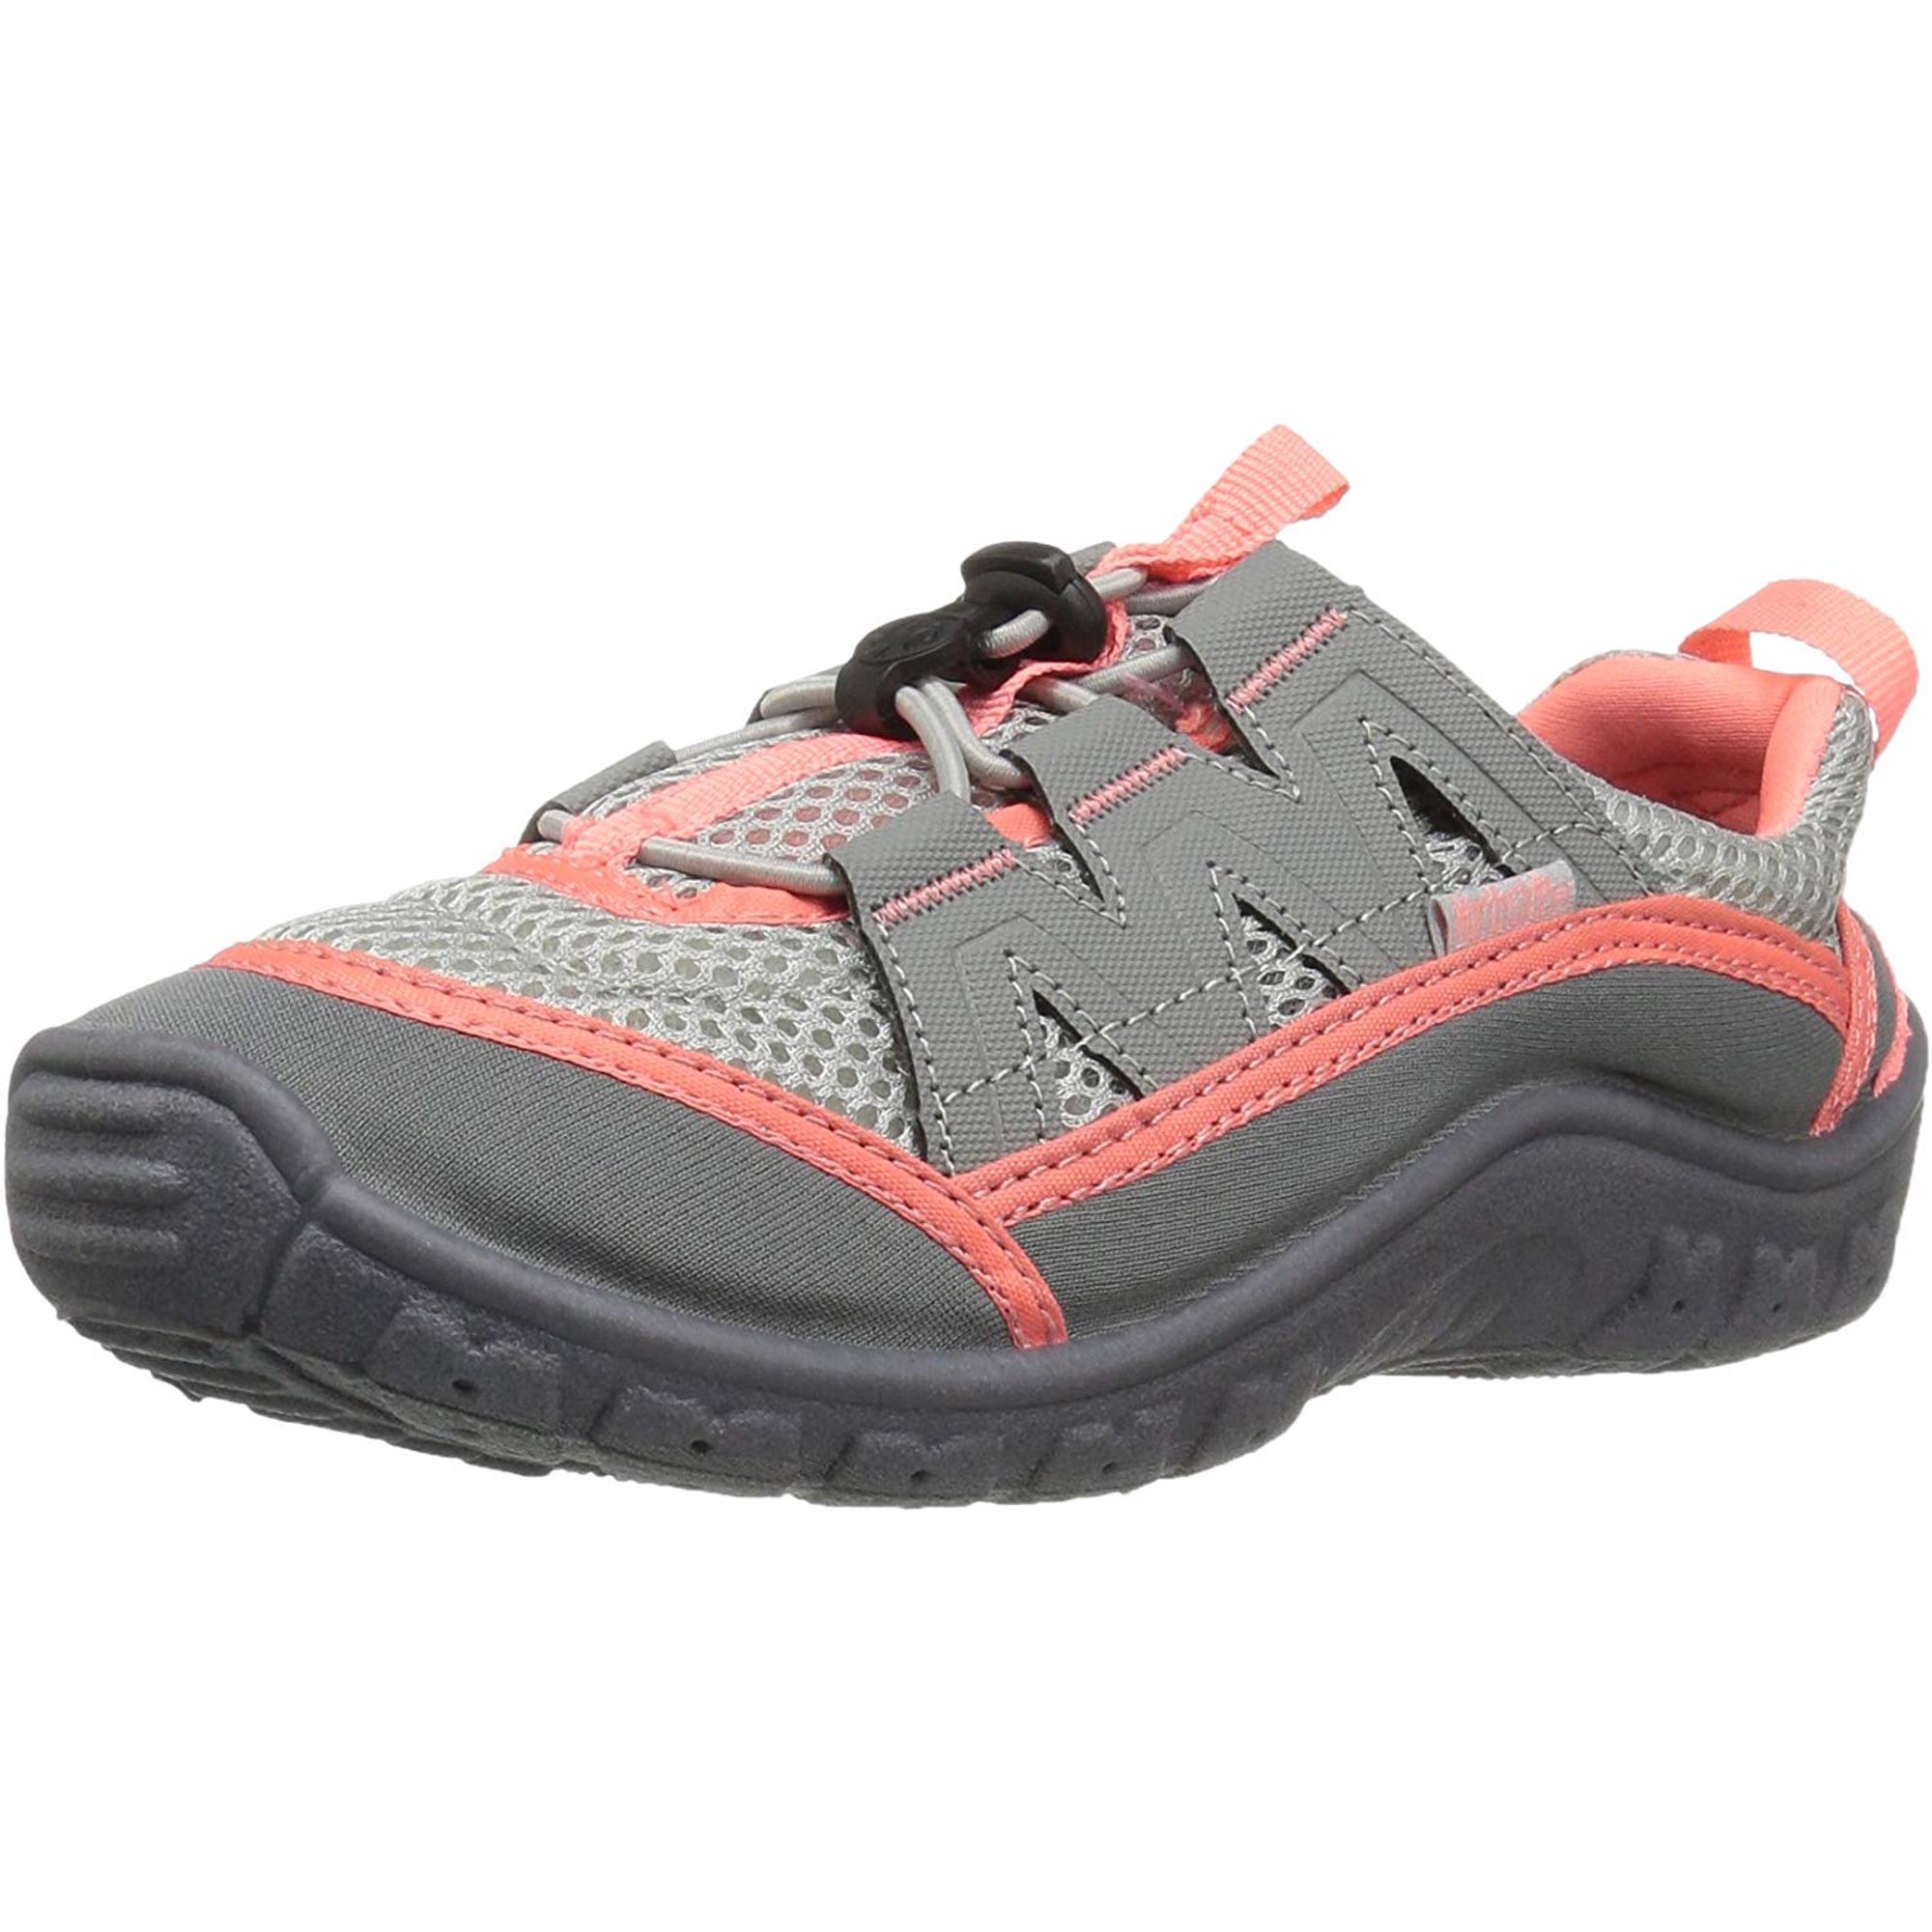 Northside Brille Water Shoe Gray Coral 5 M Us Toddler Walmart Canada